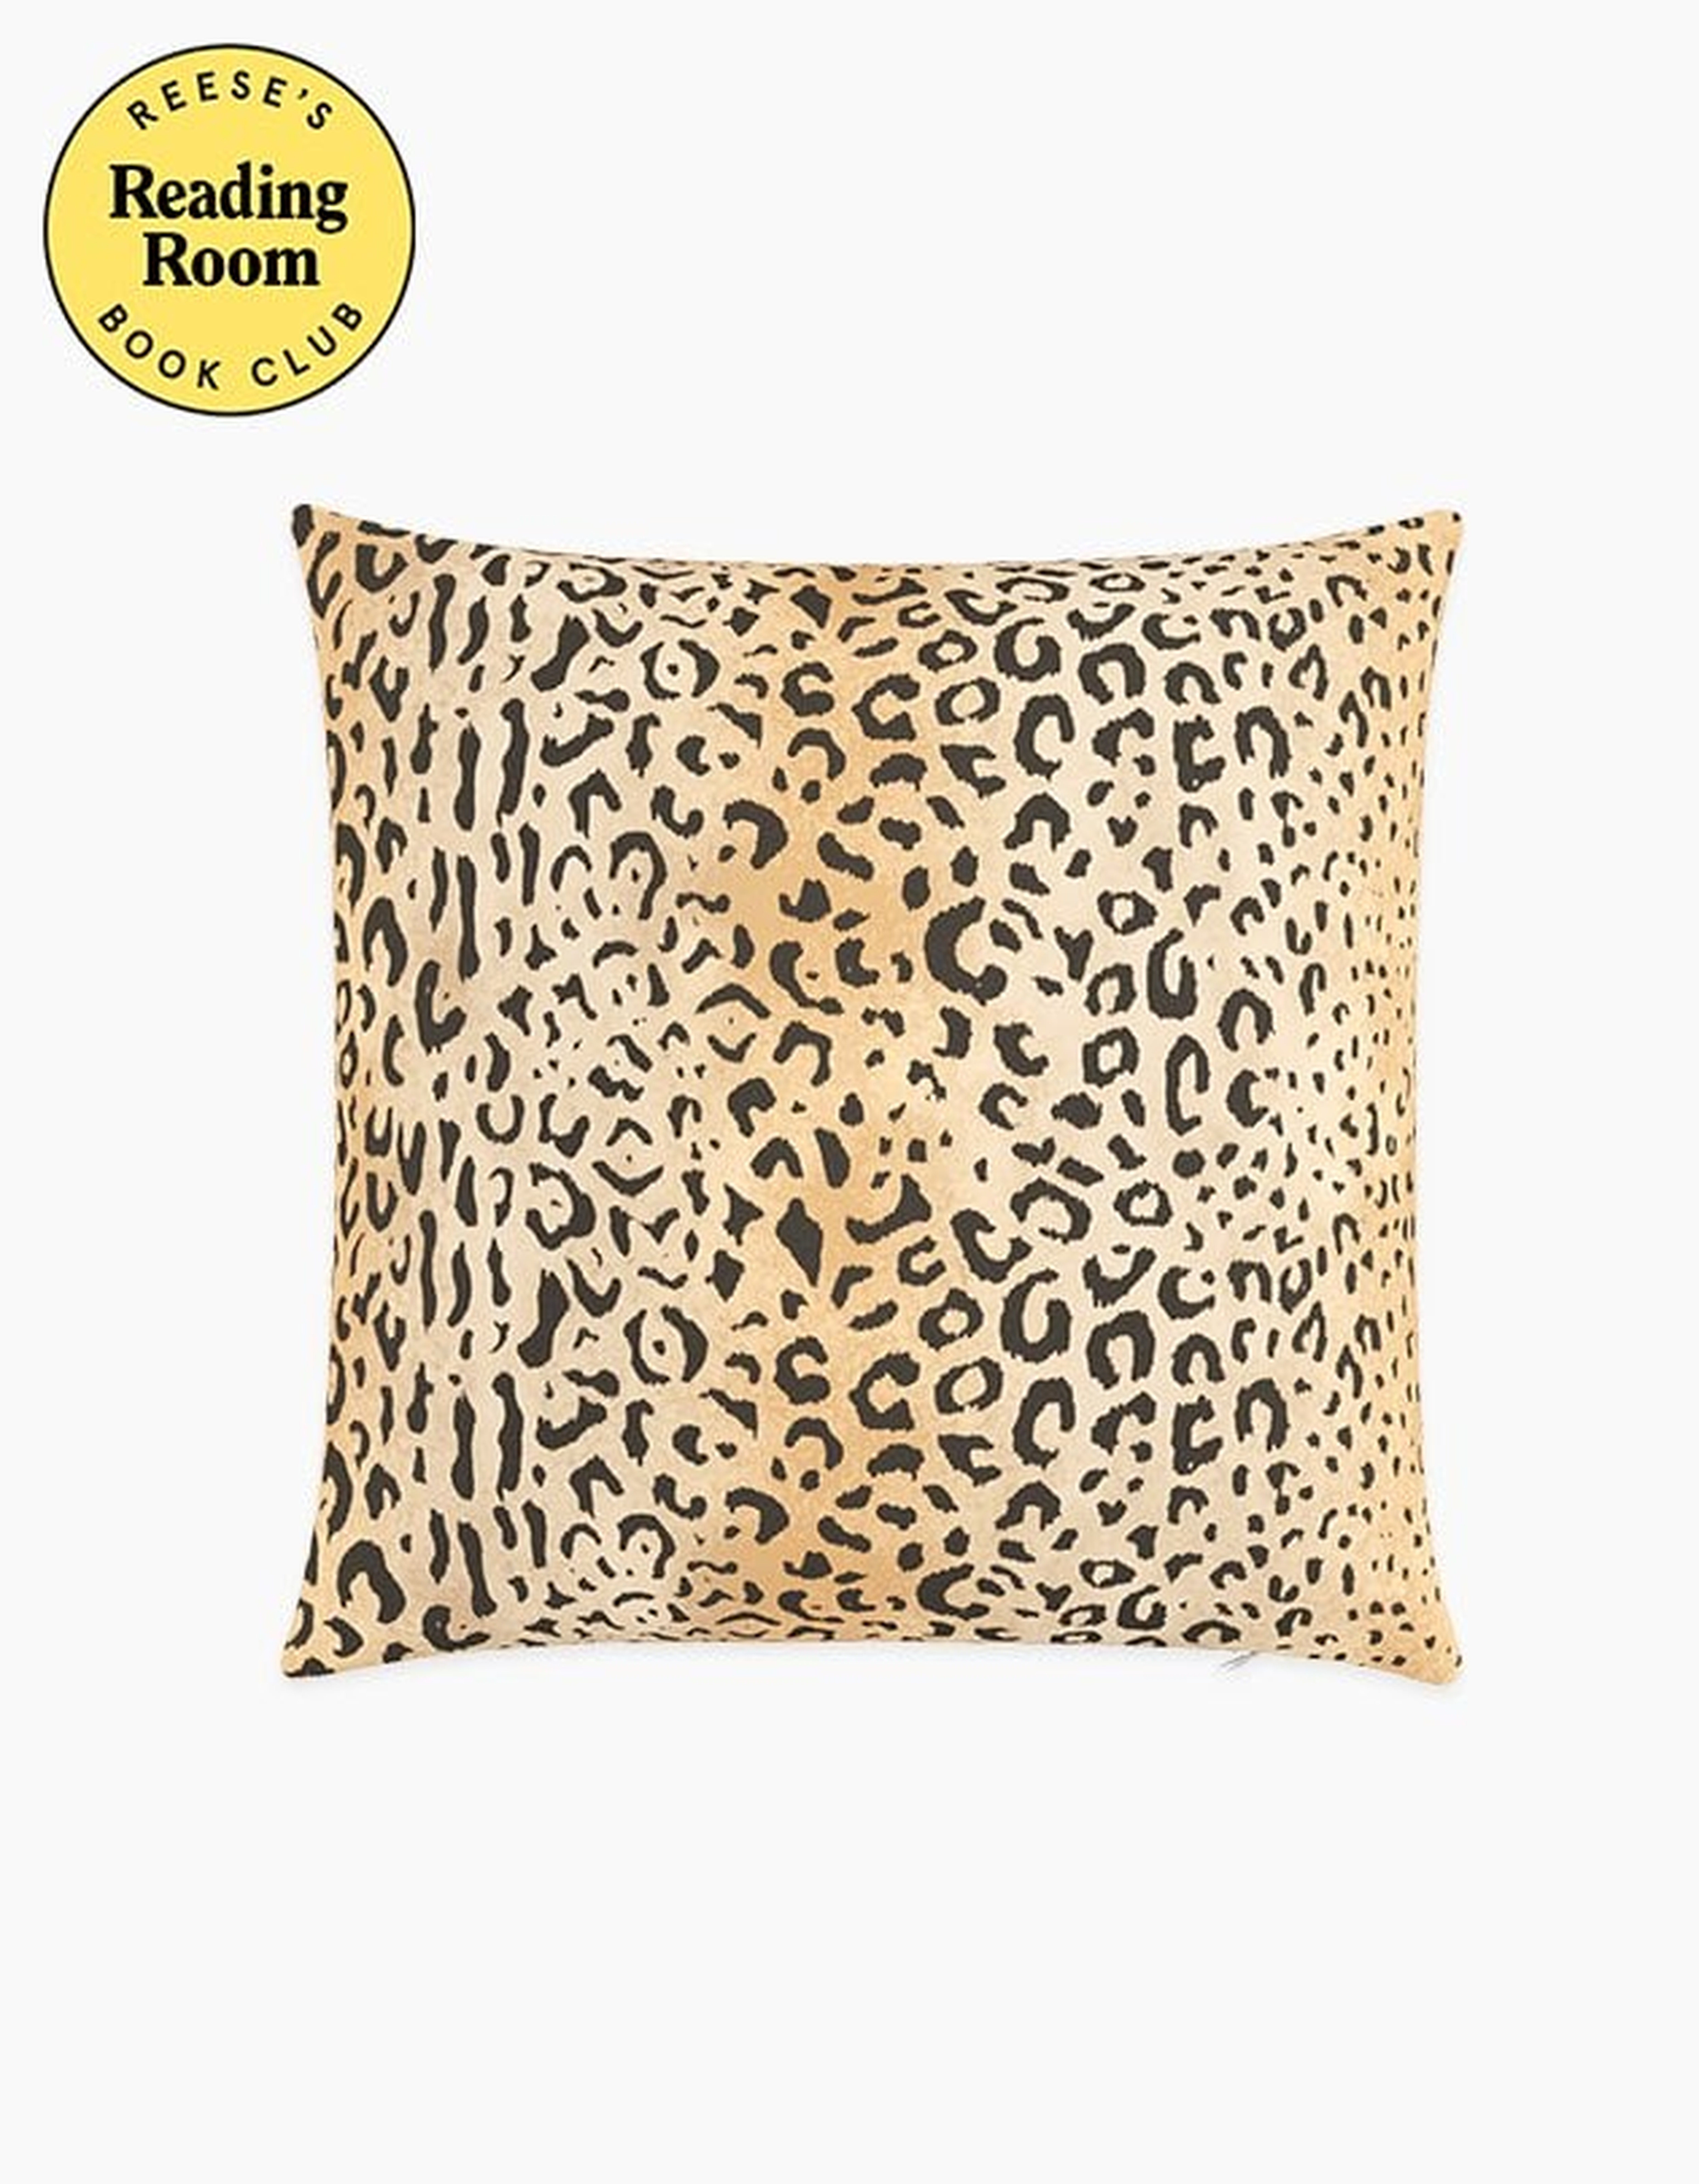 Leopard Throw Pillow - 20" x 20" - Reese's Book Club x Havenly